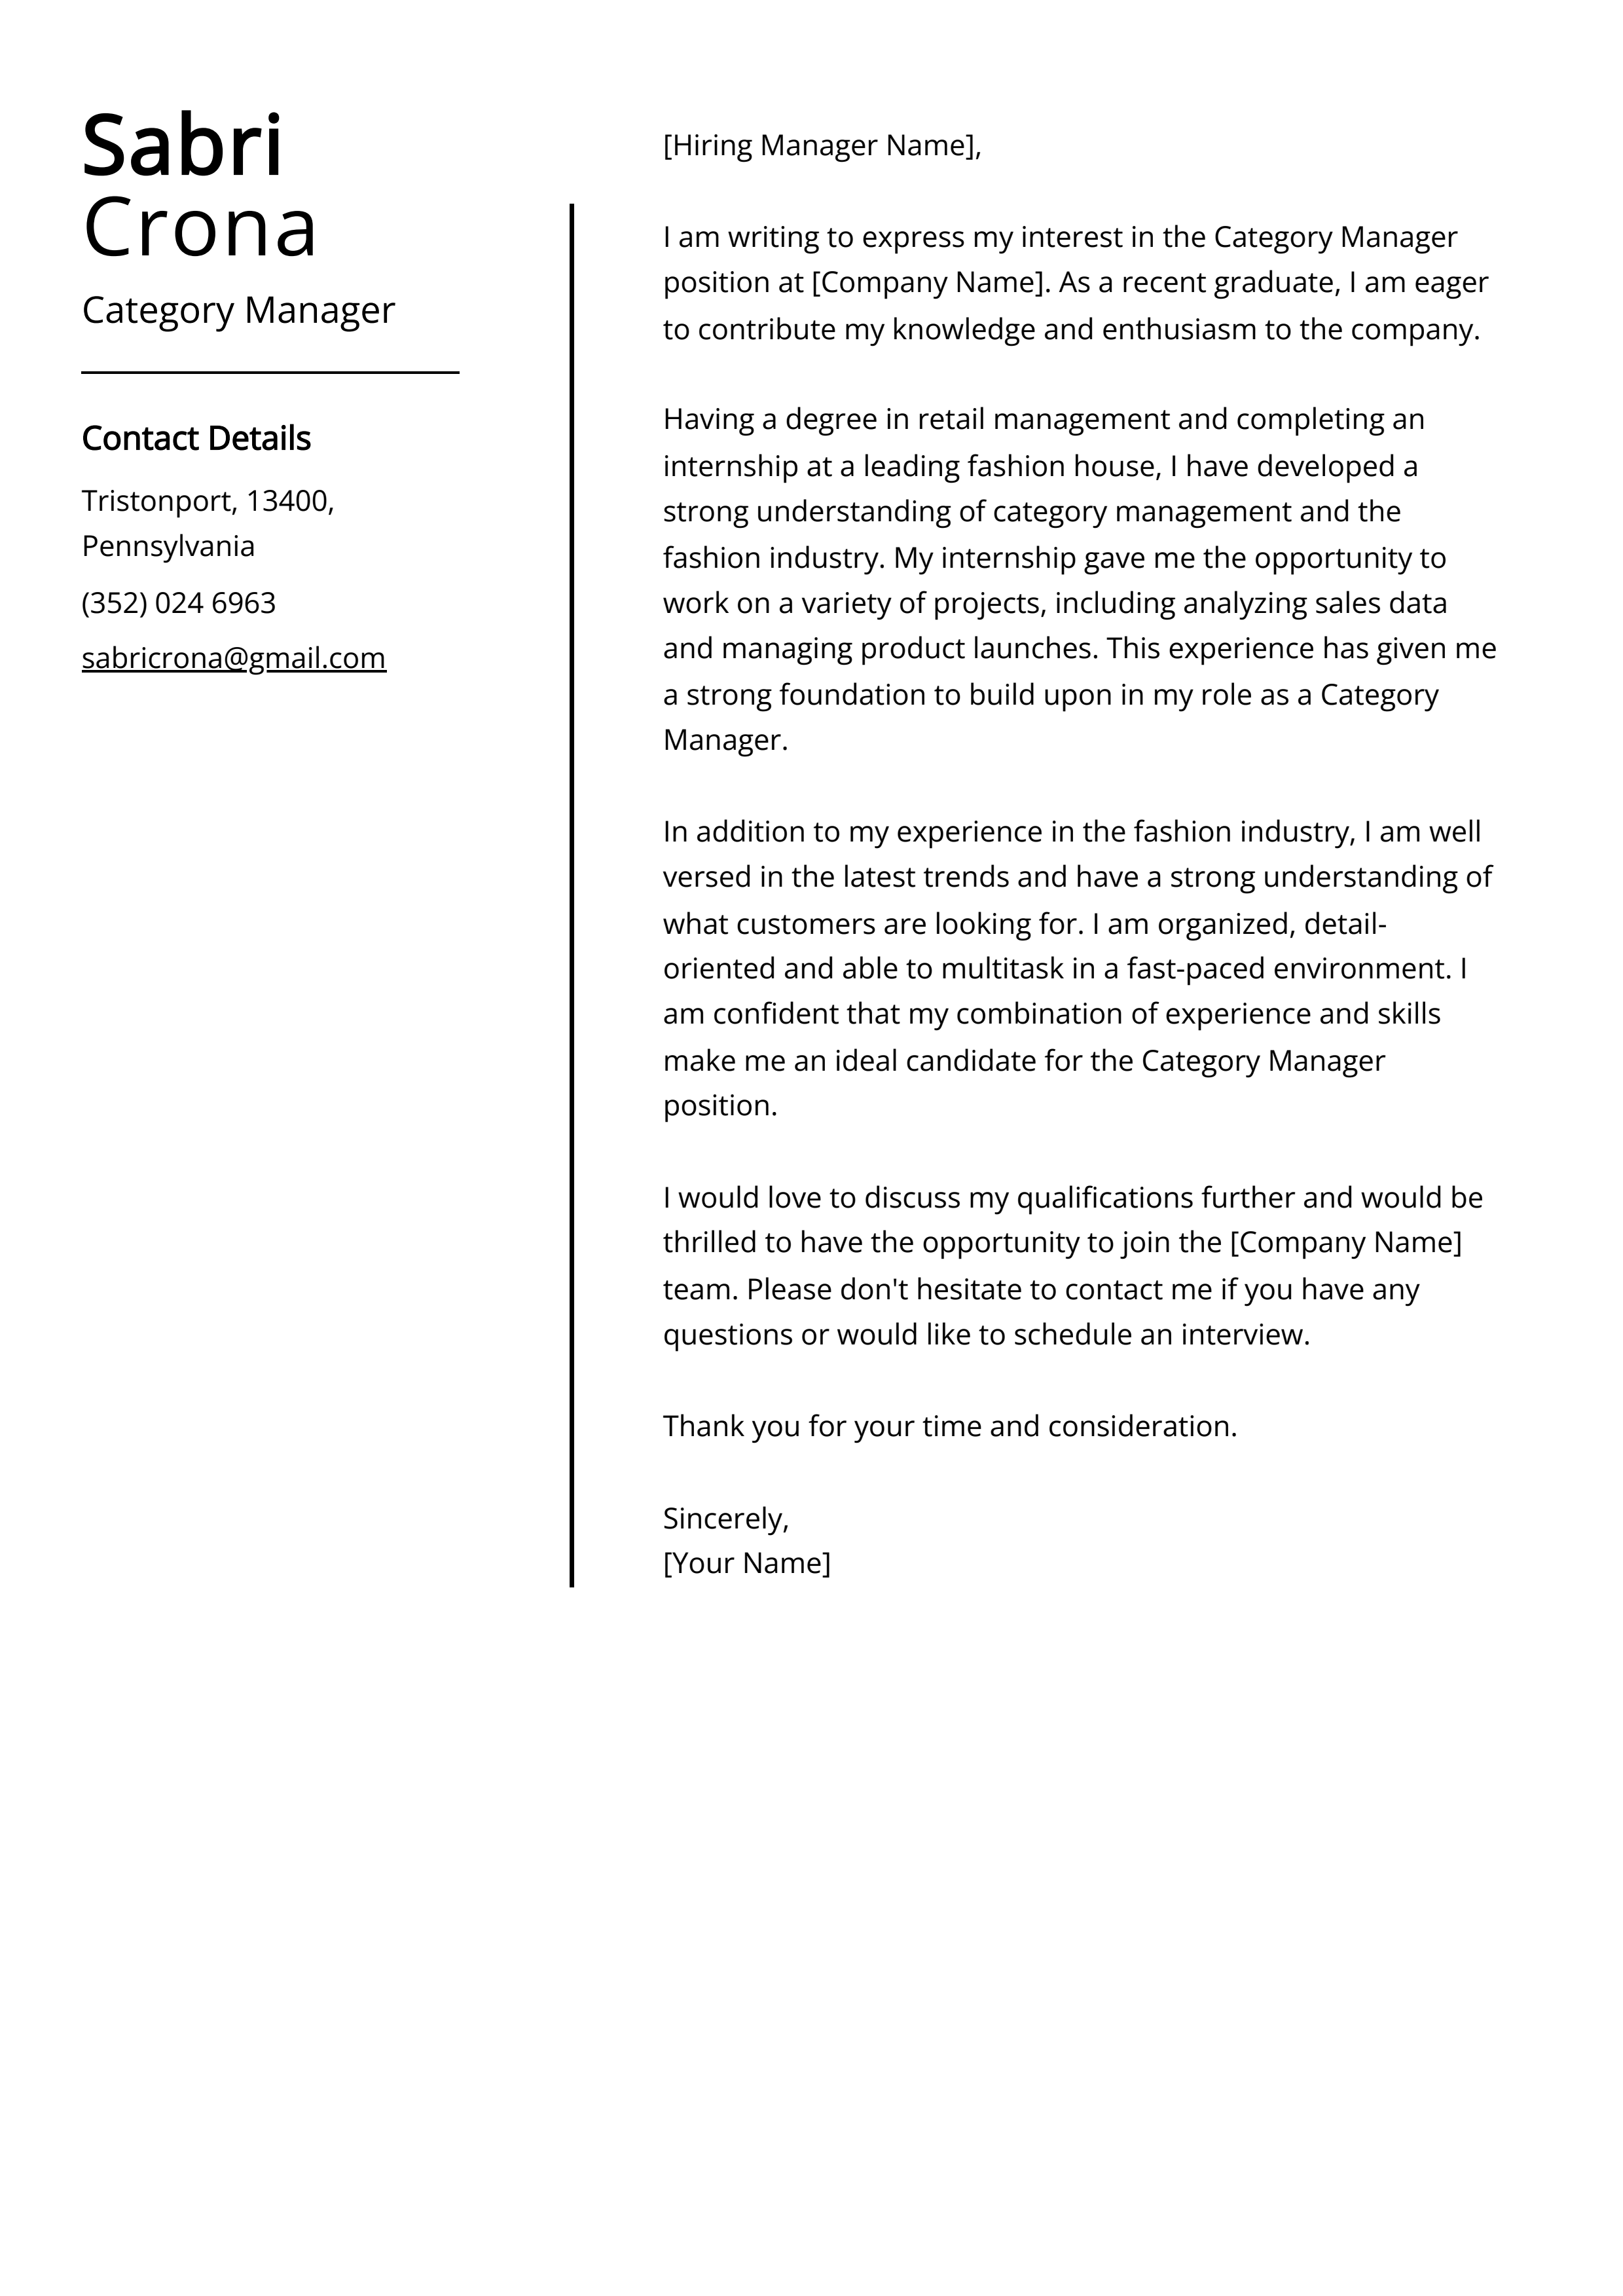 Category Manager Cover Letter Example